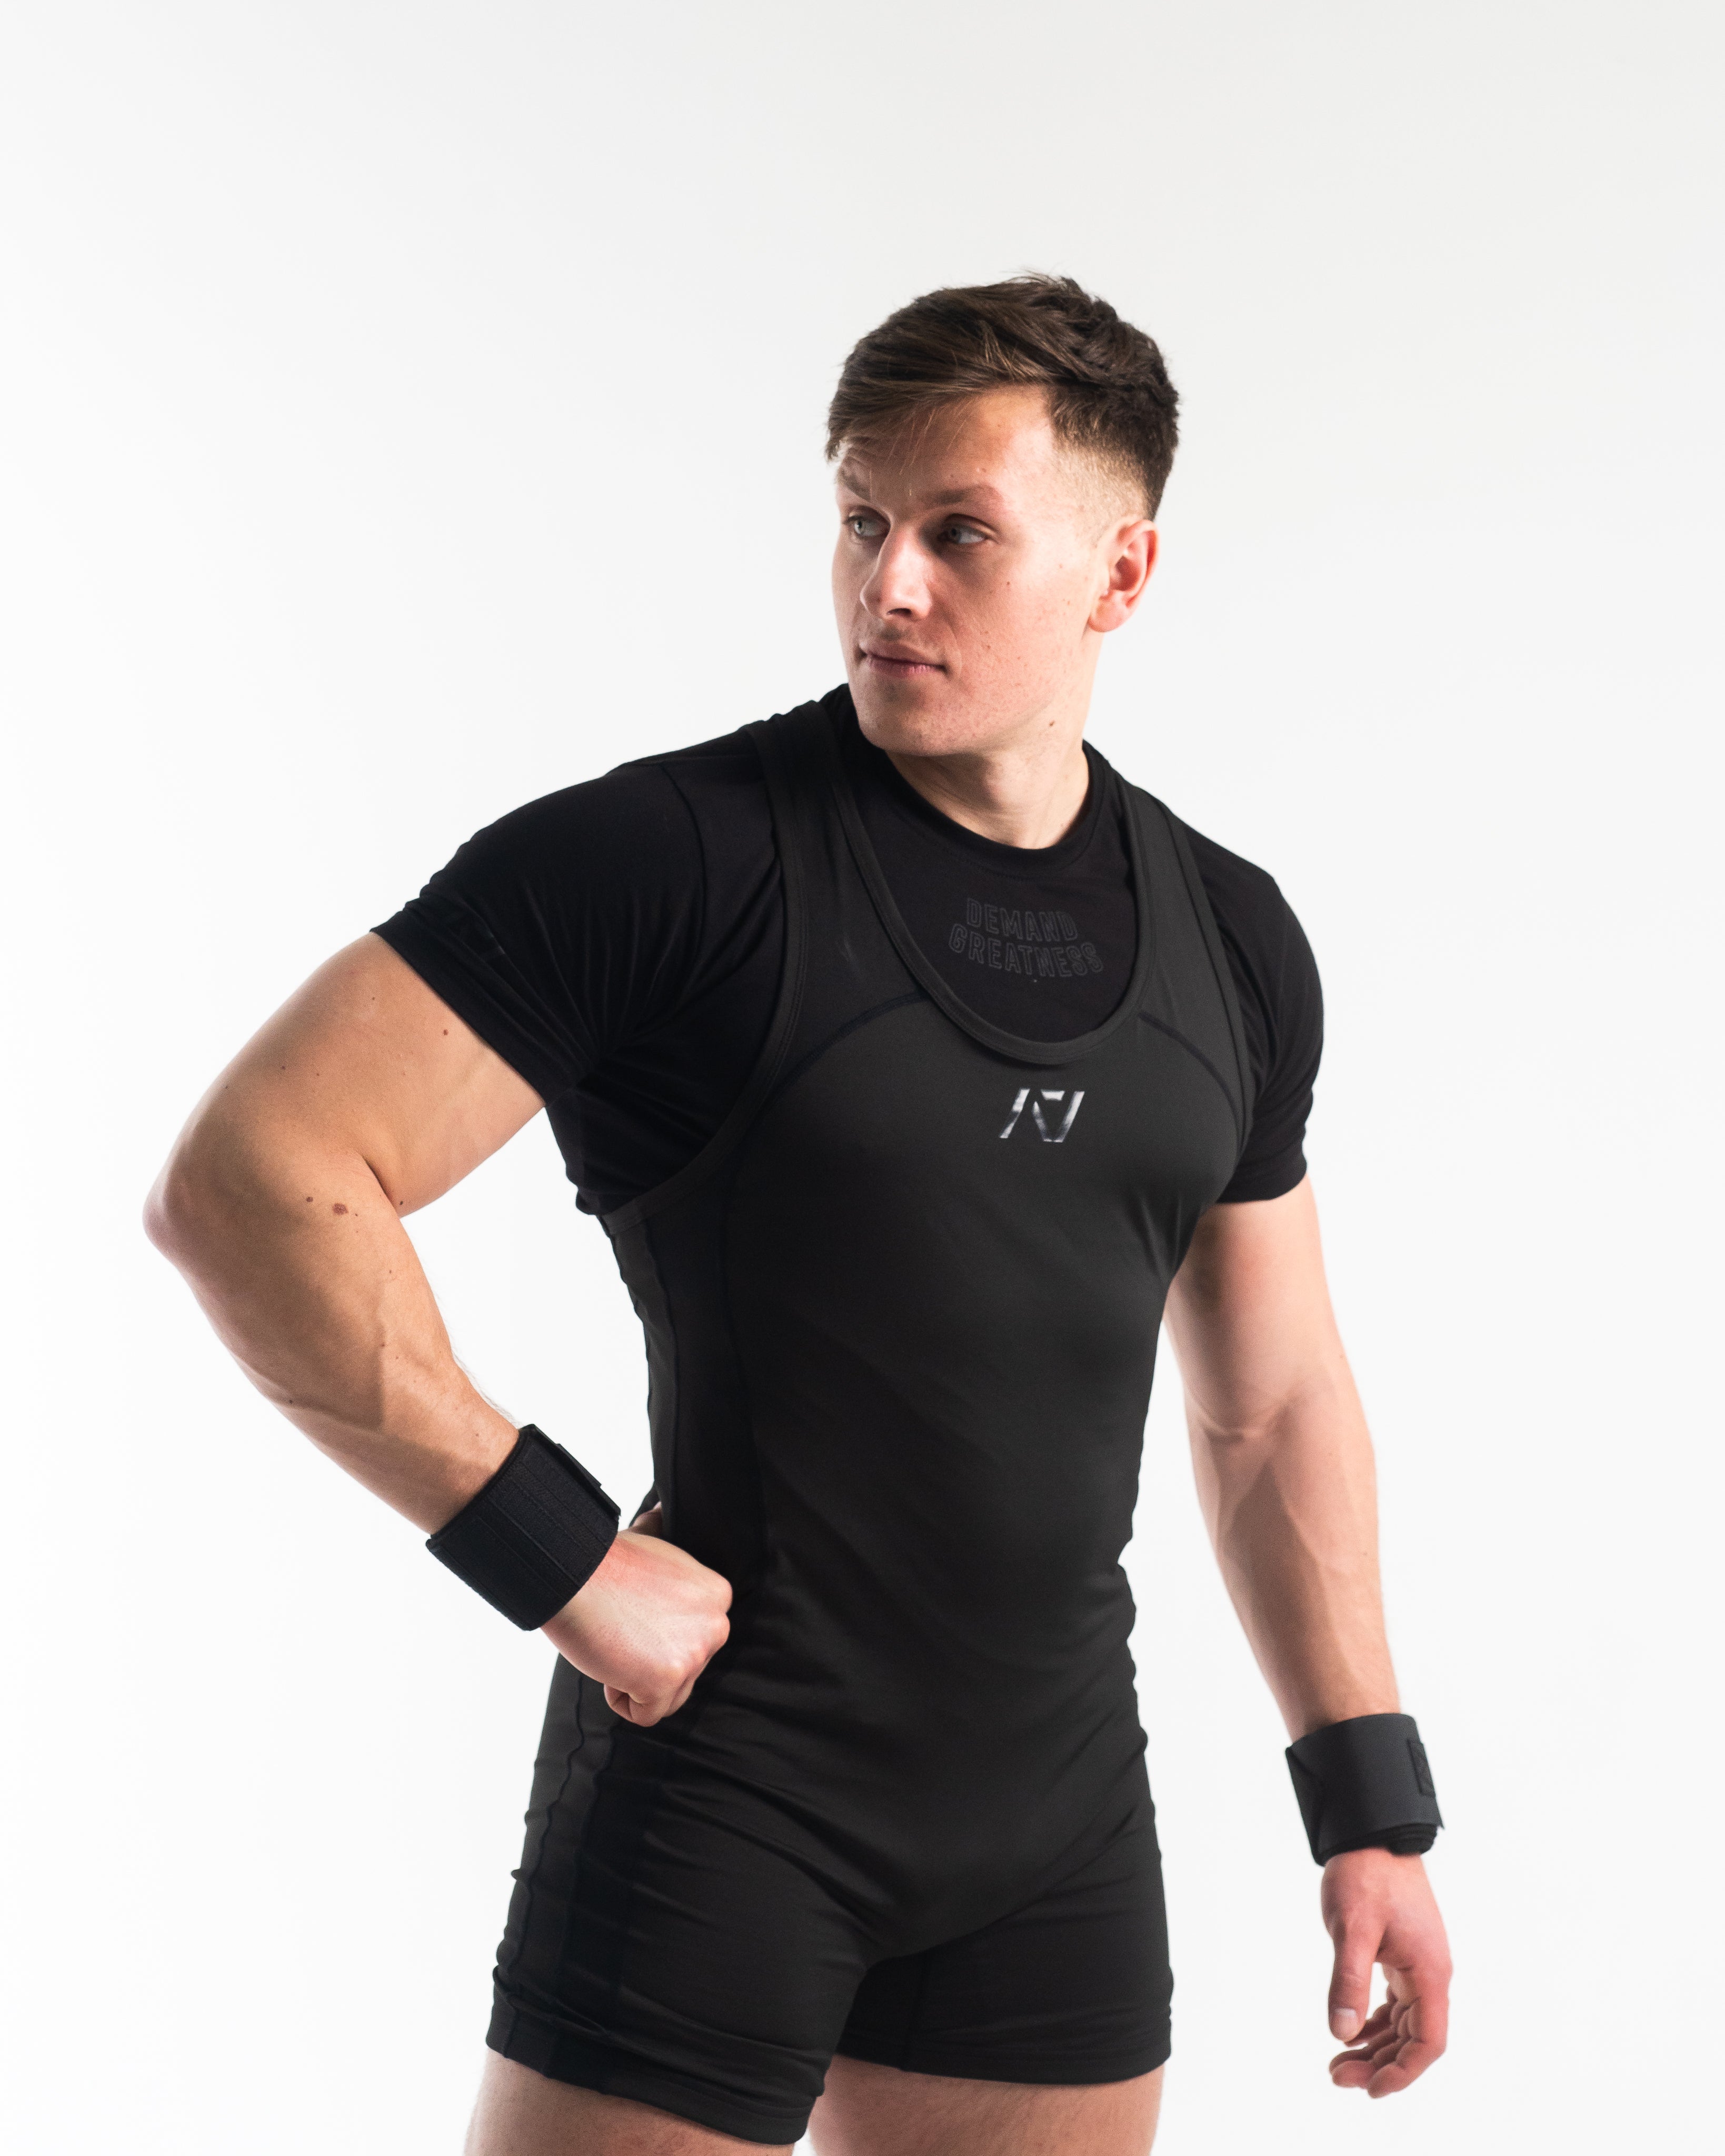 Black & Gold Weightlifting Singlet - IPF Approved